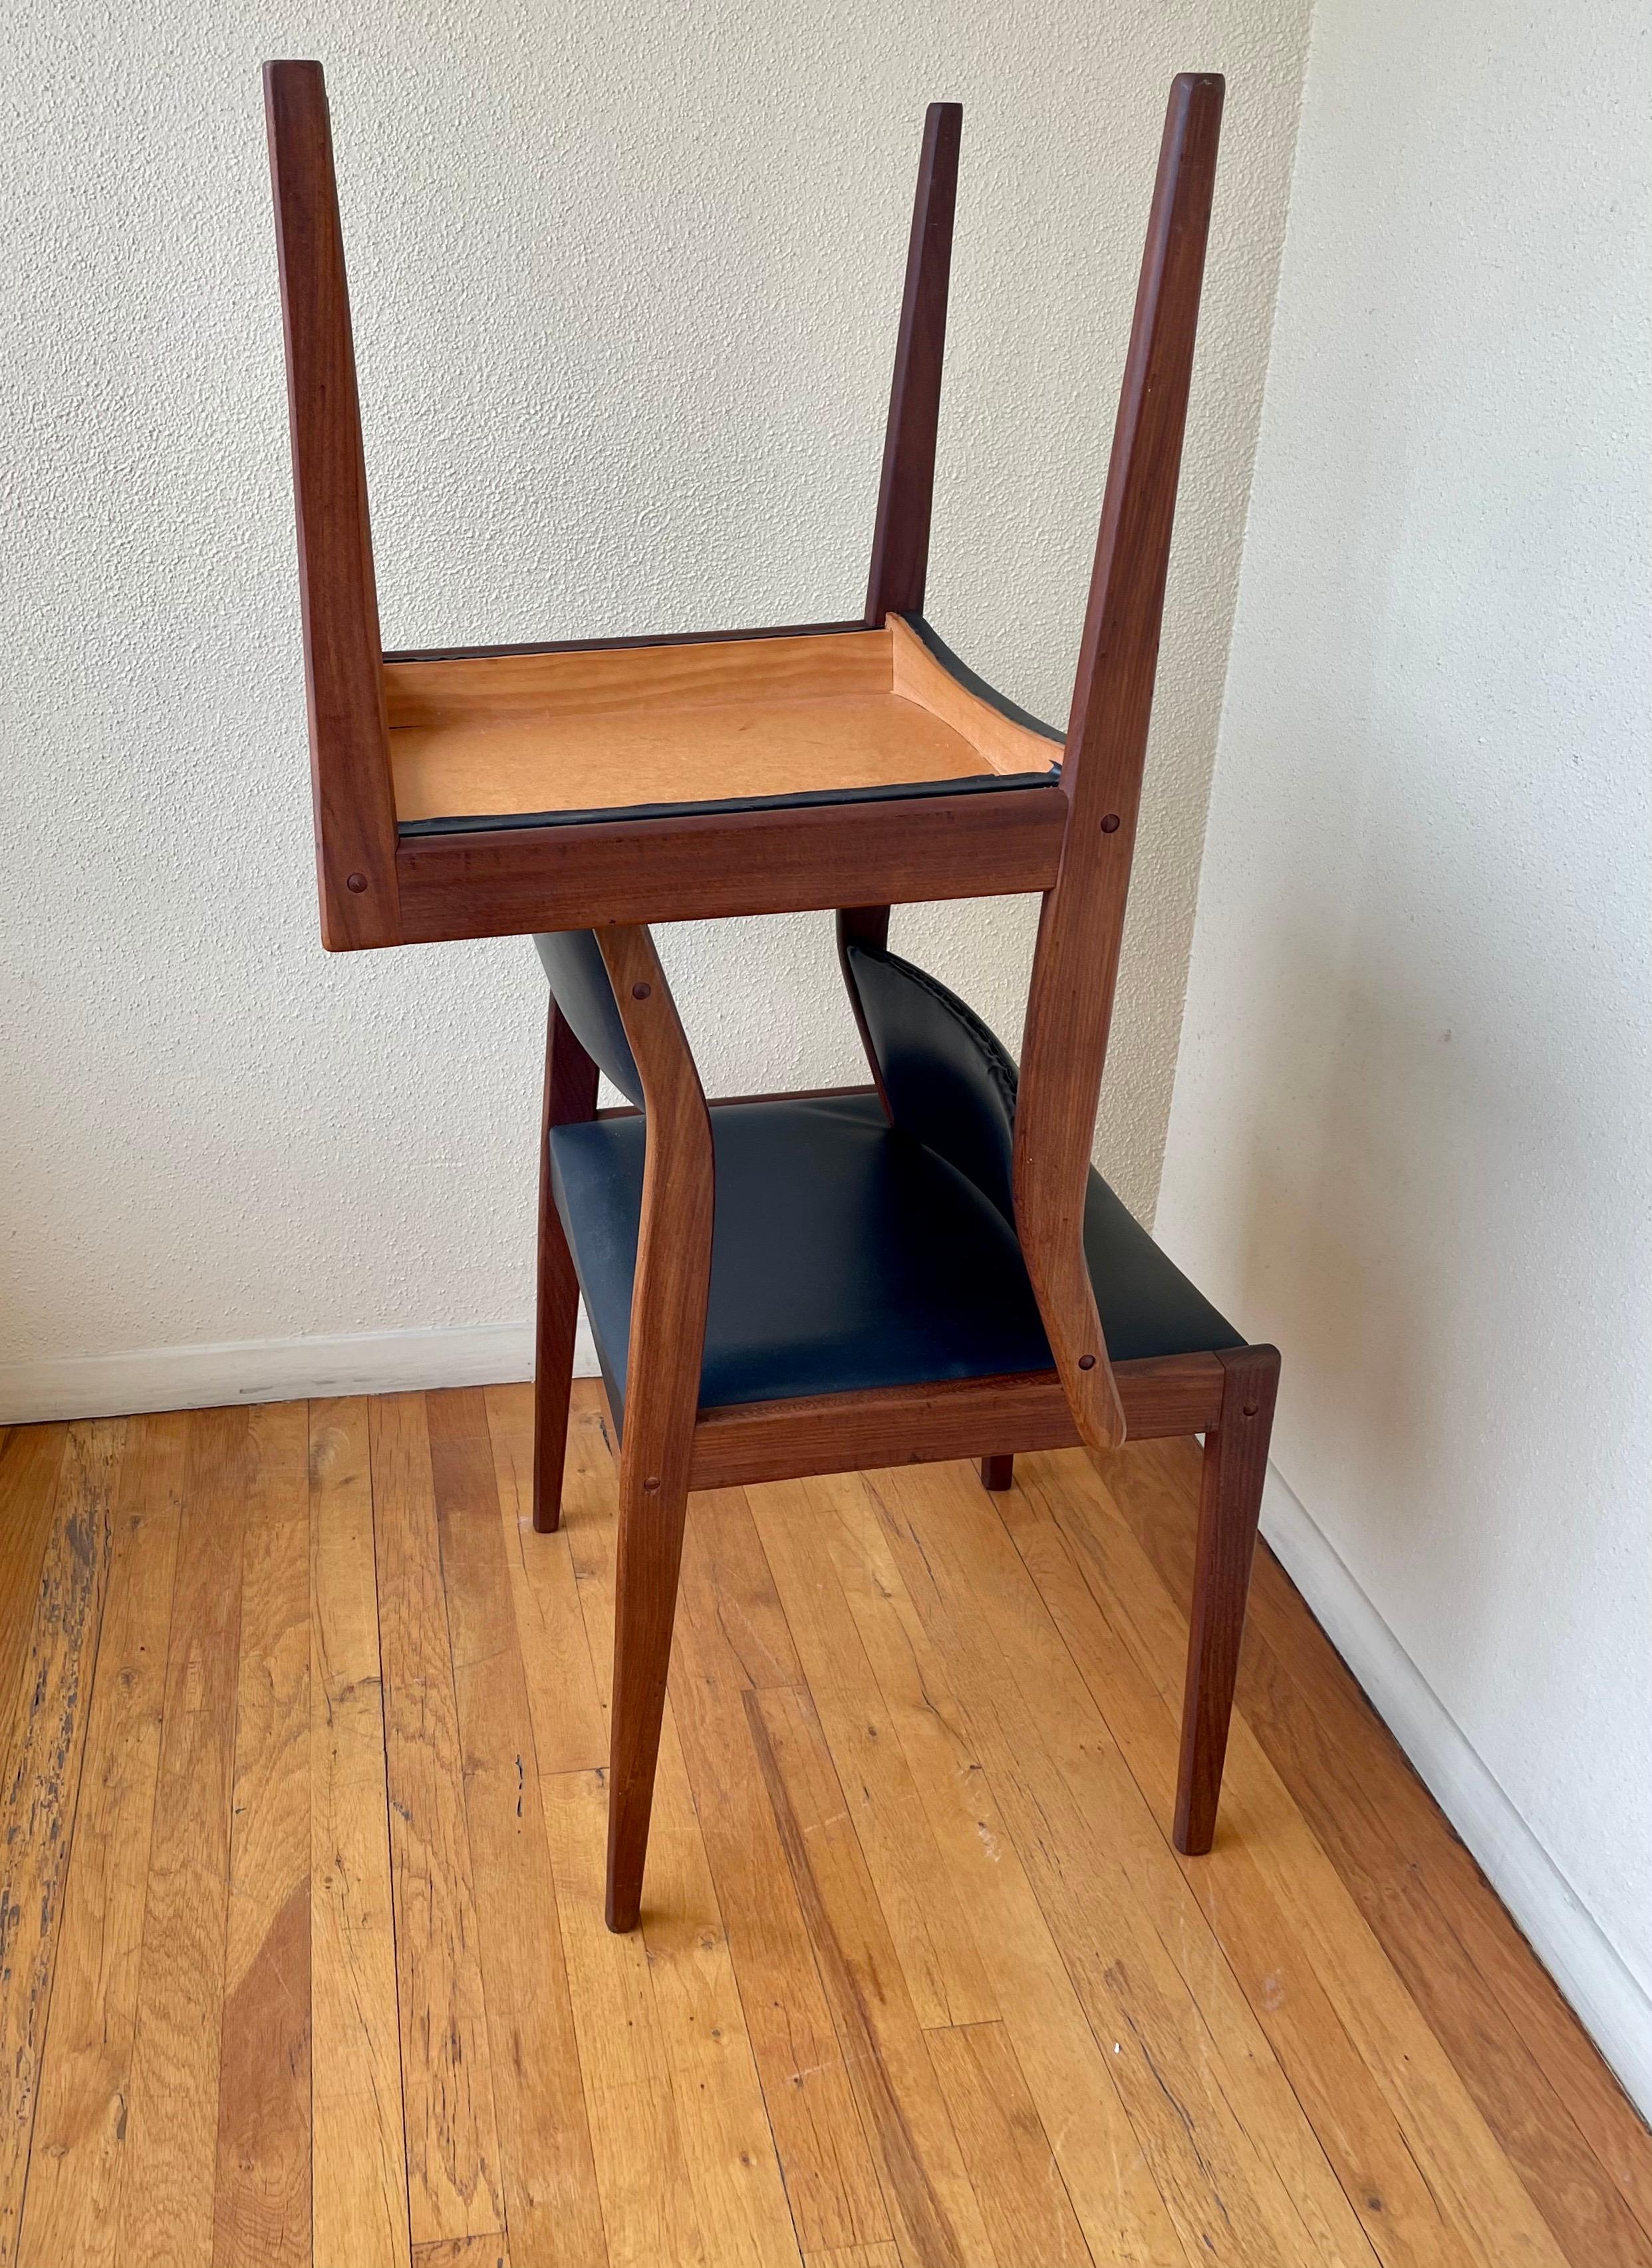 Great set of four solid teak frames dining chairs circa the 1970s, great condition black Naugahyde seat, and back, solid and sturdy. We have cleaned and oiled each chair in great original condition.